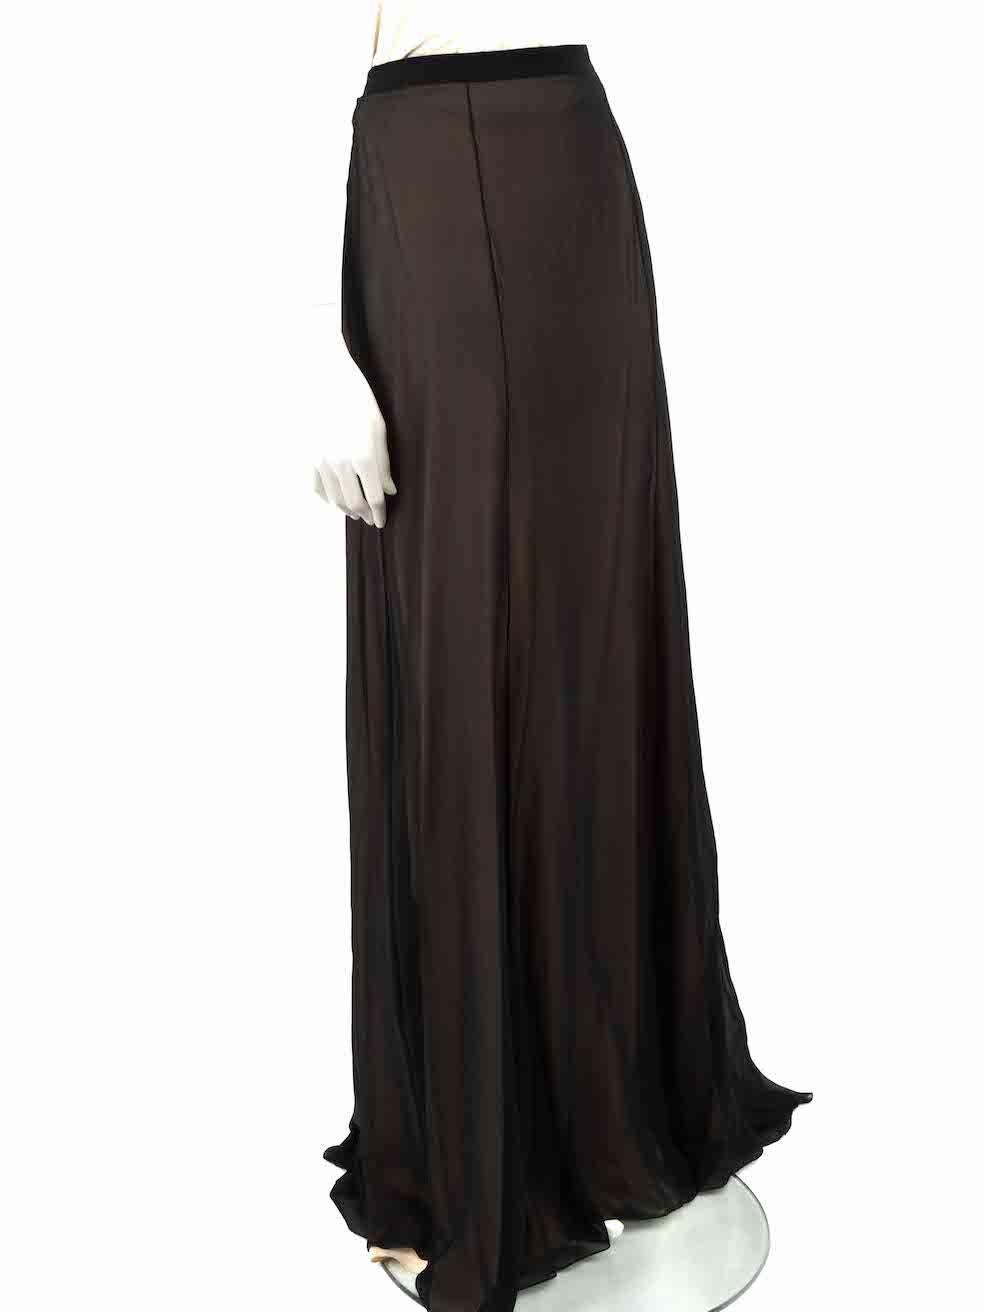 CONDITION is Very good. Hardly any visible wear to dress is evident on this used Honayda designer resale item.
 
 
 
 Details
 
 
 Black
 
 Synthetic
 
 Skirt
 
 Maxi
 
 Sheer black overlay
 
 Beige lining
 
 Back zip and hook fastening
 
 
 
 
 
